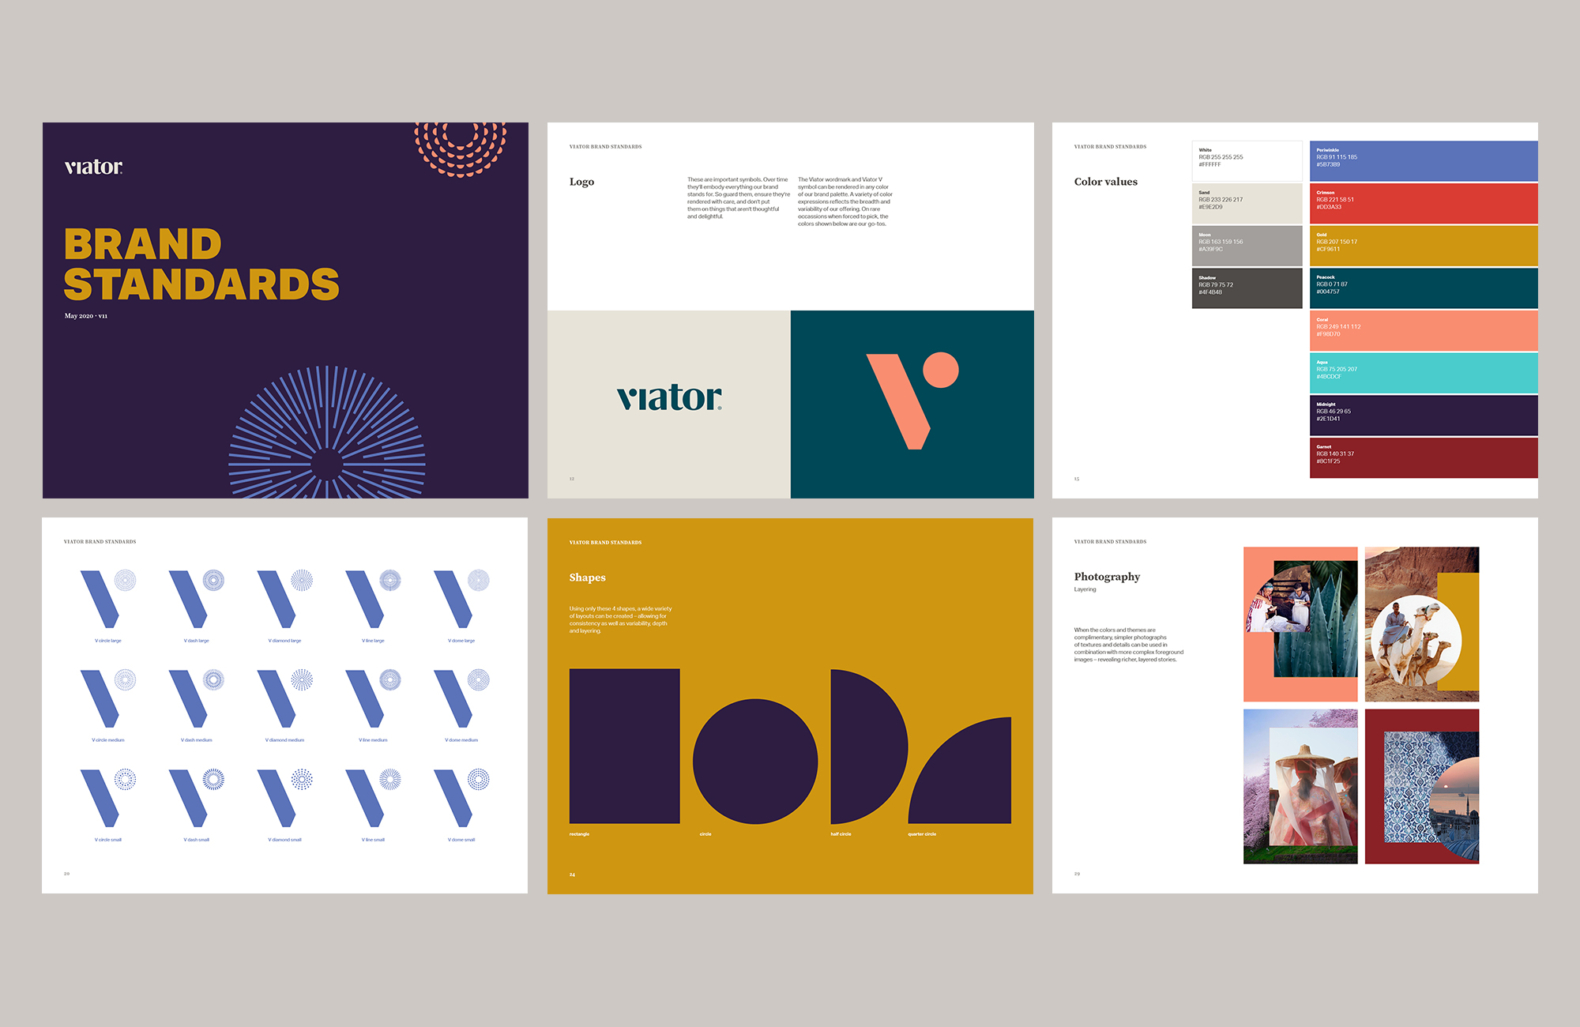 Excerpts from Viator’s new Brand Standards, which includes a breakdown of Viator’s new logo and its variations; color palette; a toolkit of shapes composed of a rectangle, circle, half circle and quarter circle; and photography guidelines. 